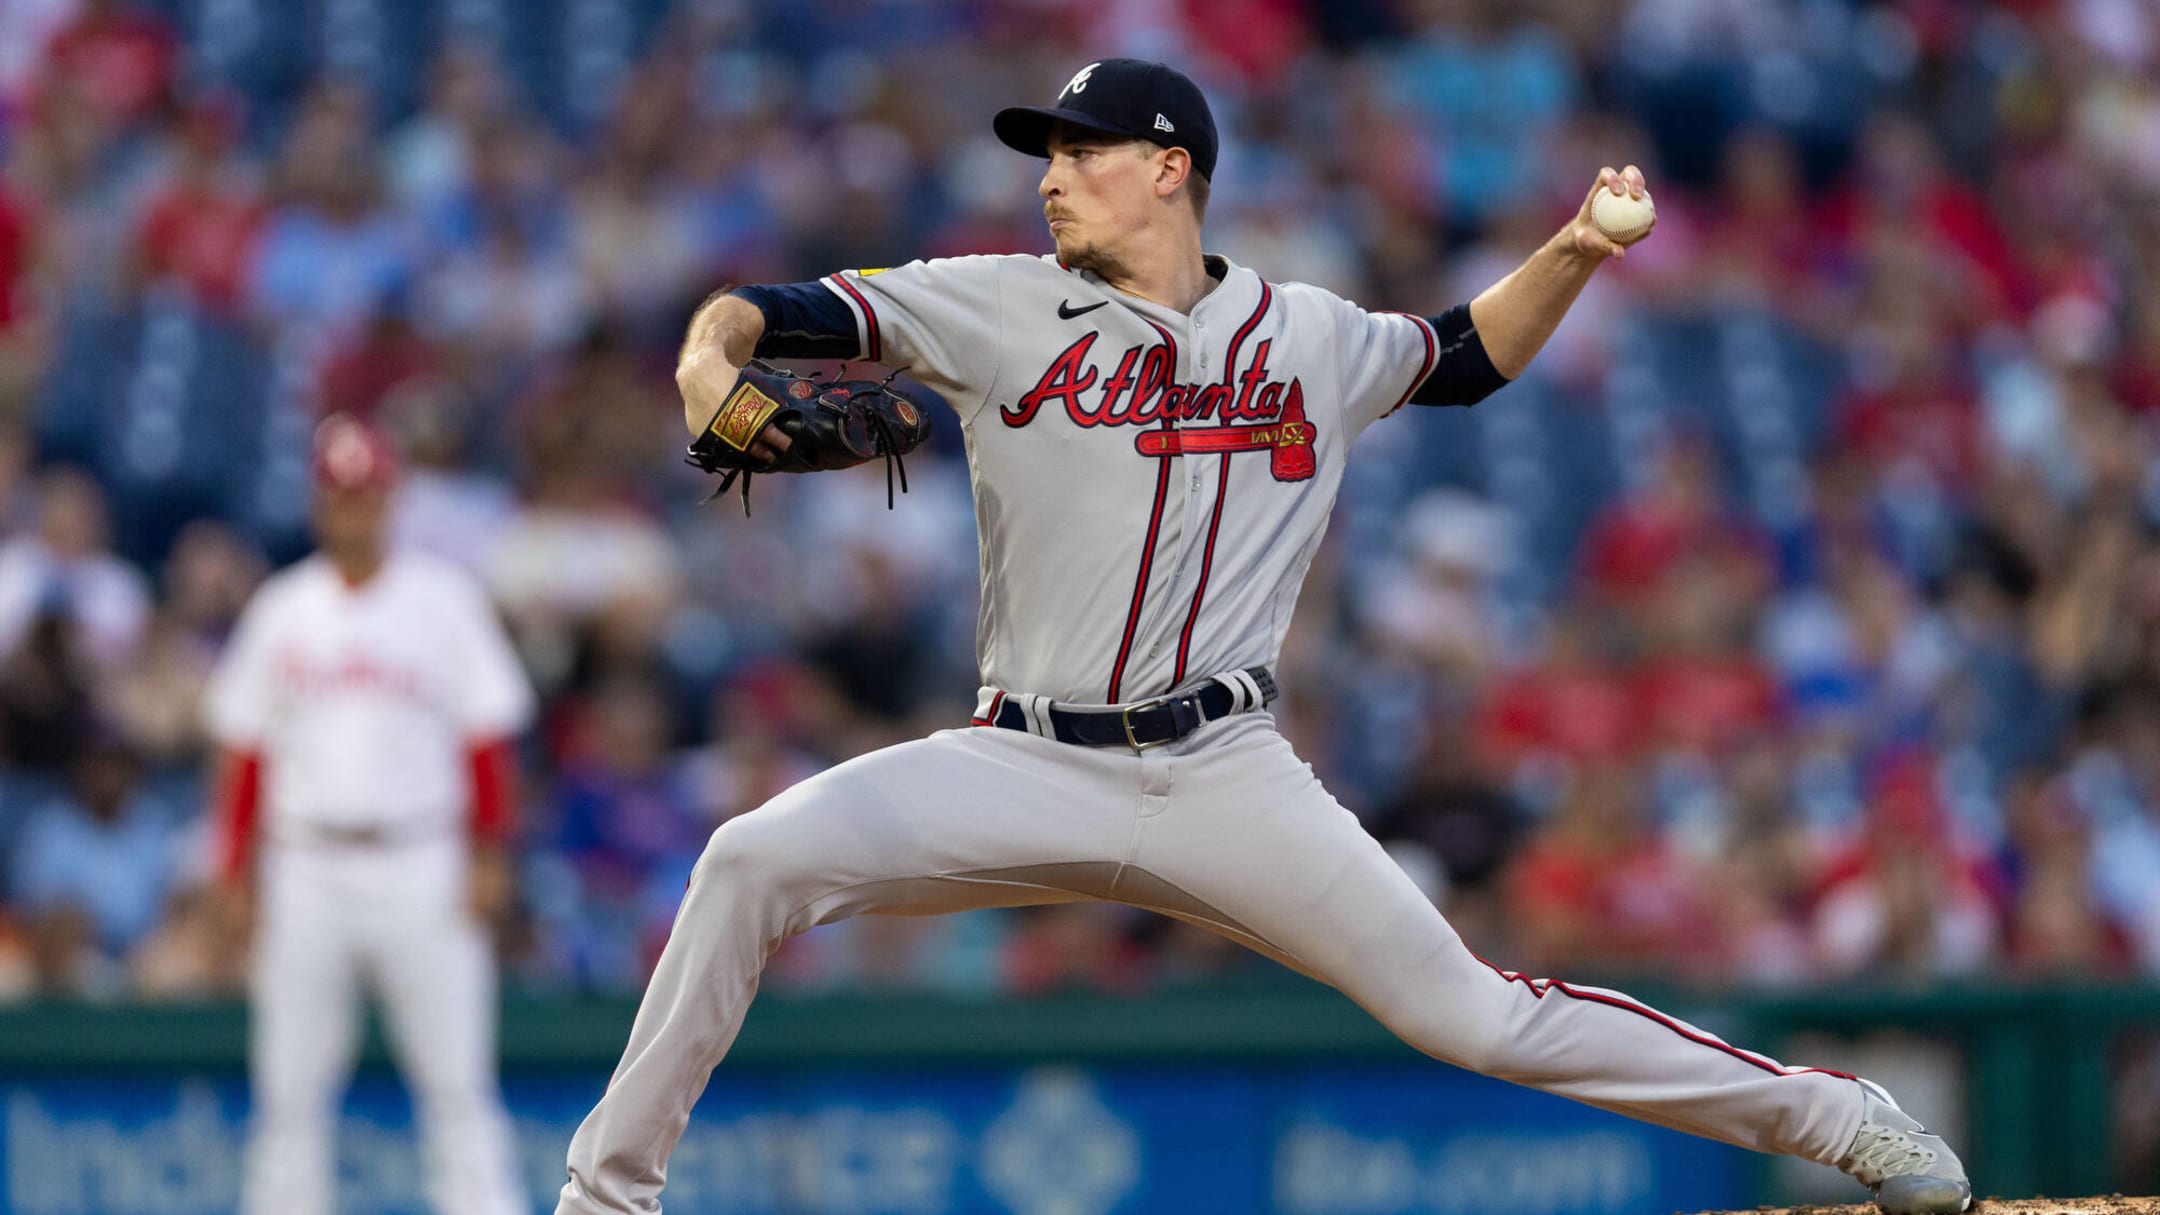 Grant McAuley on X: Cool list, but I'd add these #Braves uniforms